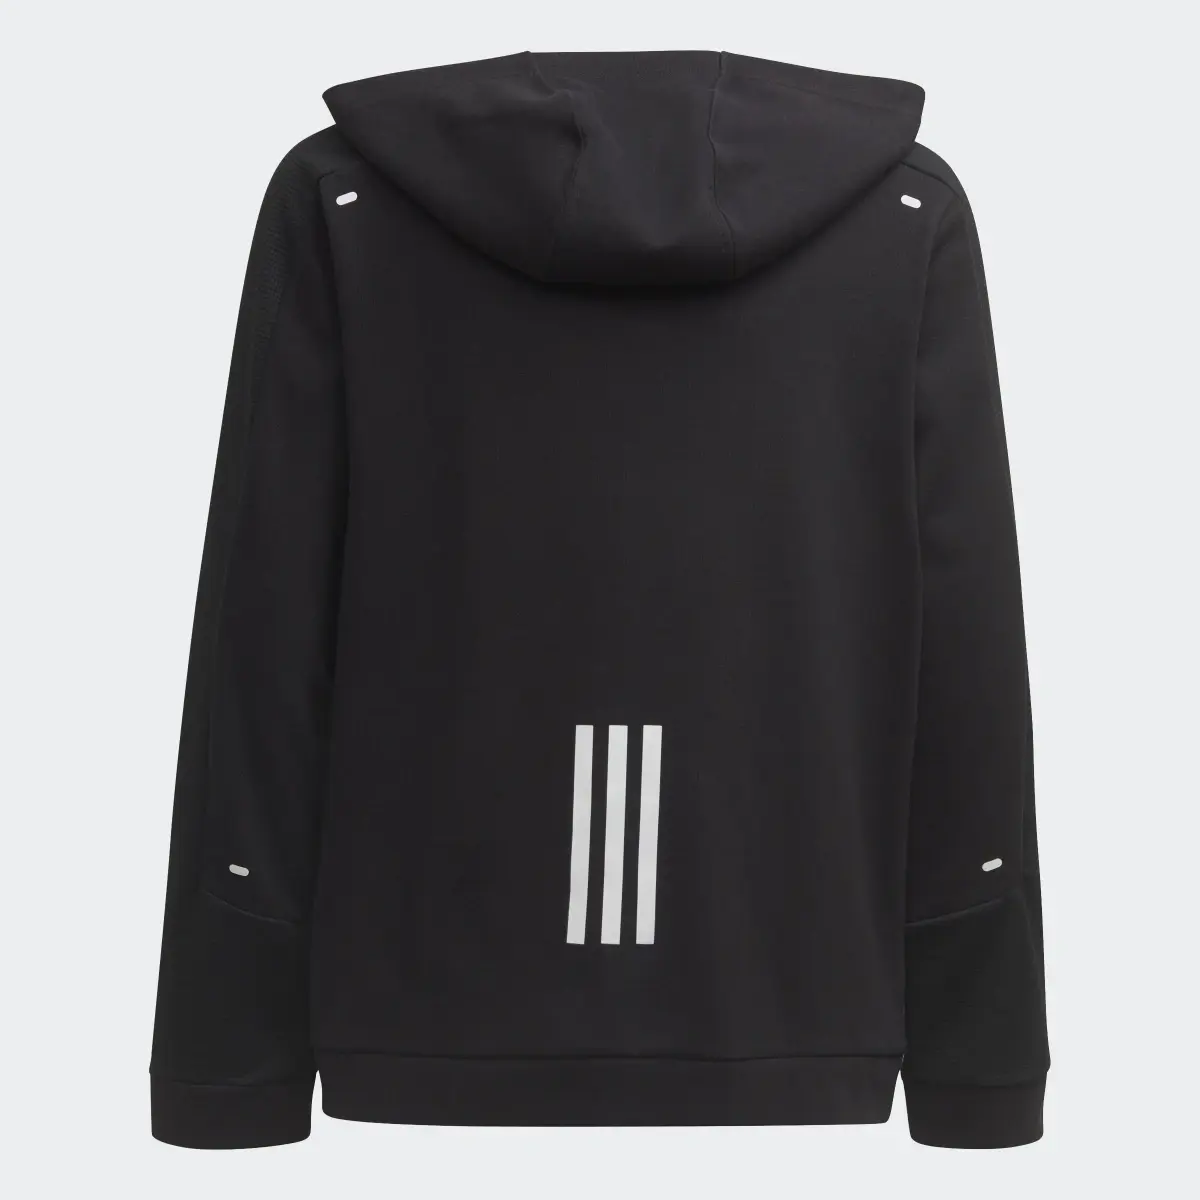 Adidas XFG Techy Inspired Summer Track Top. 2